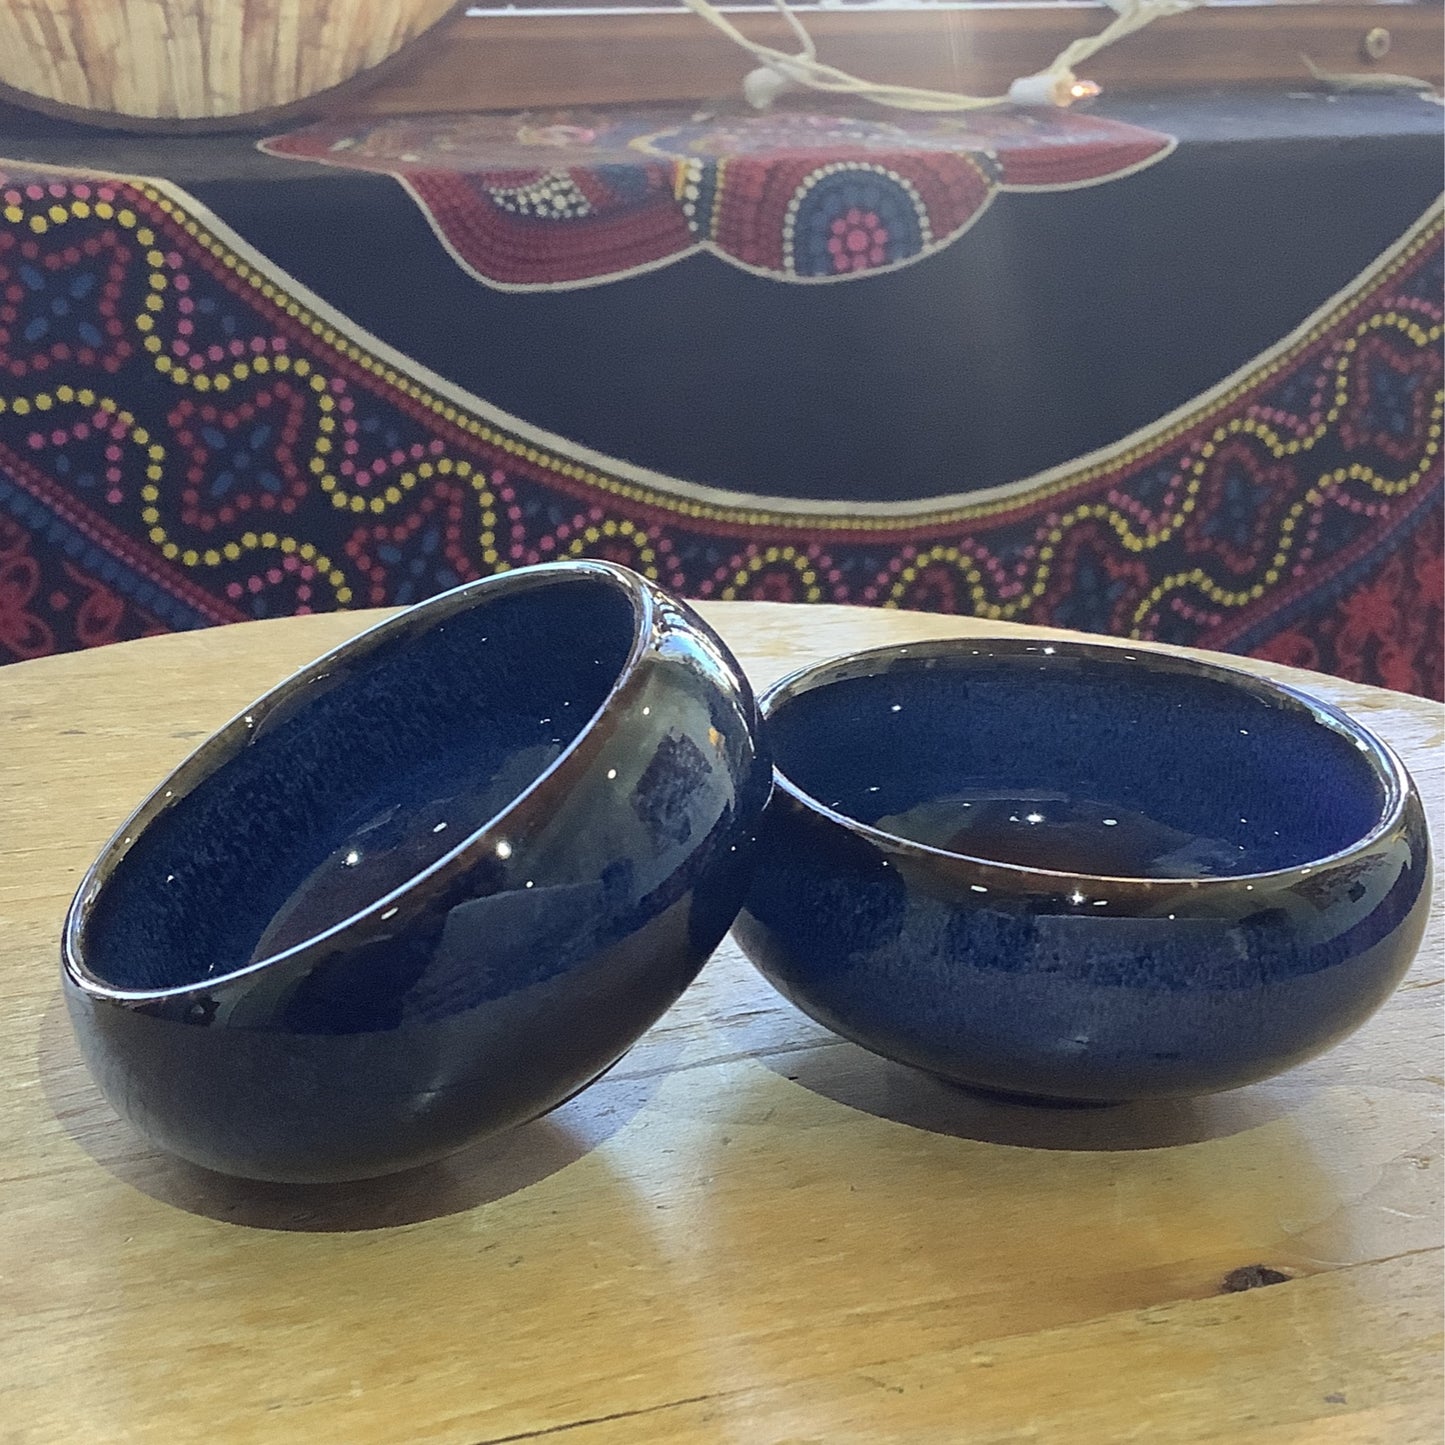 Trinket and or Incense bowl